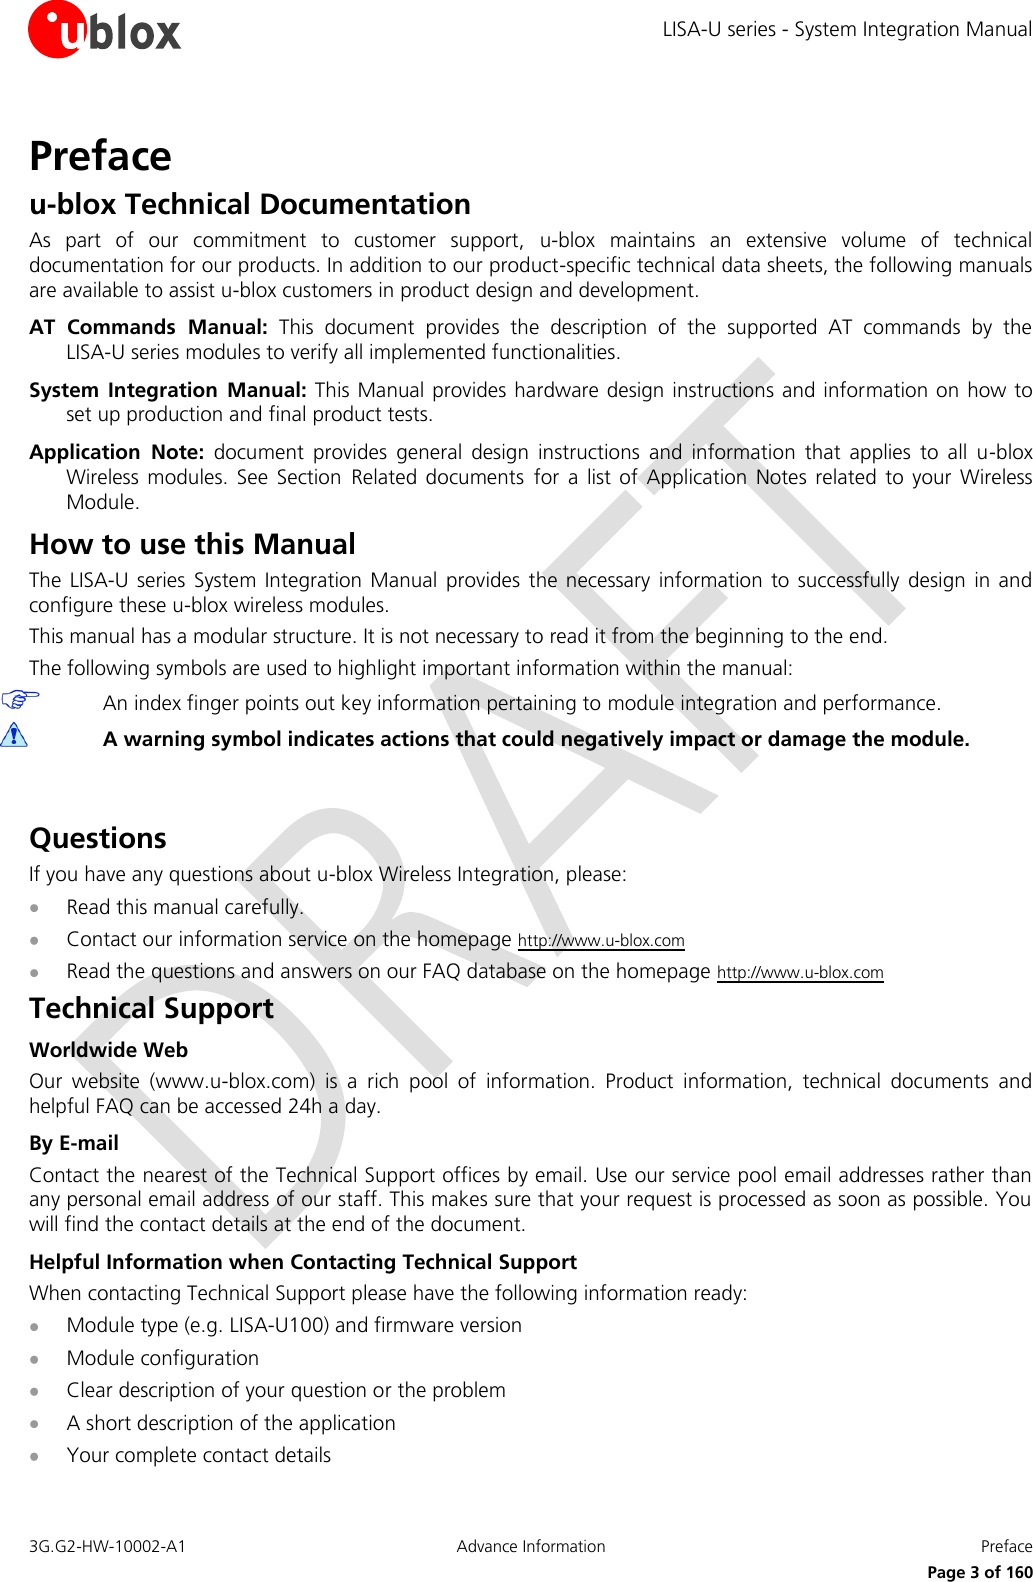 LISA-U series - System Integration Manual 3G.G2-HW-10002-A1  Advance Information  Preface      Page 3 of 160 Preface u-blox Technical Documentation As  part  of  our  commitment  to  customer  support,  u-blox  maintains  an  extensive  volume  of  technical documentation for our products. In addition to our product-specific technical data sheets, the following manuals are available to assist u-blox customers in product design and development. AT  Commands  Manual:  This  document  provides  the  description  of  the  supported  AT  commands  by  the  LISA-U series modules to verify all implemented functionalities. System  Integration  Manual: This Manual provides hardware design instructions and information on how to set up production and final product tests. Application  Note:  document  provides  general  design  instructions  and  information  that  applies  to  all  u-blox Wireless  modules.  See  Section Related  documents for  a  list  of  Application  Notes  related  to  your  Wireless Module. How to use this Manual The  LISA-U series  System  Integration Manual  provides  the  necessary information to successfully  design  in and configure these u-blox wireless modules. This manual has a modular structure. It is not necessary to read it from the beginning to the end. The following symbols are used to highlight important information within the manual:  An index finger points out key information pertaining to module integration and performance.  A warning symbol indicates actions that could negatively impact or damage the module.  Questions If you have any questions about u-blox Wireless Integration, please:  Read this manual carefully.  Contact our information service on the homepage http://www.u-blox.com  Read the questions and answers on our FAQ database on the homepage http://www.u-blox.com Technical Support Worldwide Web Our  website  (www.u-blox.com)  is  a  rich  pool  of  information.  Product  information,  technical  documents  and helpful FAQ can be accessed 24h a day. By E-mail Contact the nearest of the Technical Support offices by email. Use our service pool email addresses rather than any personal email address of our staff. This makes sure that your request is processed as soon as possible. You will find the contact details at the end of the document. Helpful Information when Contacting Technical Support When contacting Technical Support please have the following information ready:  Module type (e.g. LISA-U100) and firmware version  Module configuration  Clear description of your question or the problem  A short description of the application  Your complete contact details 